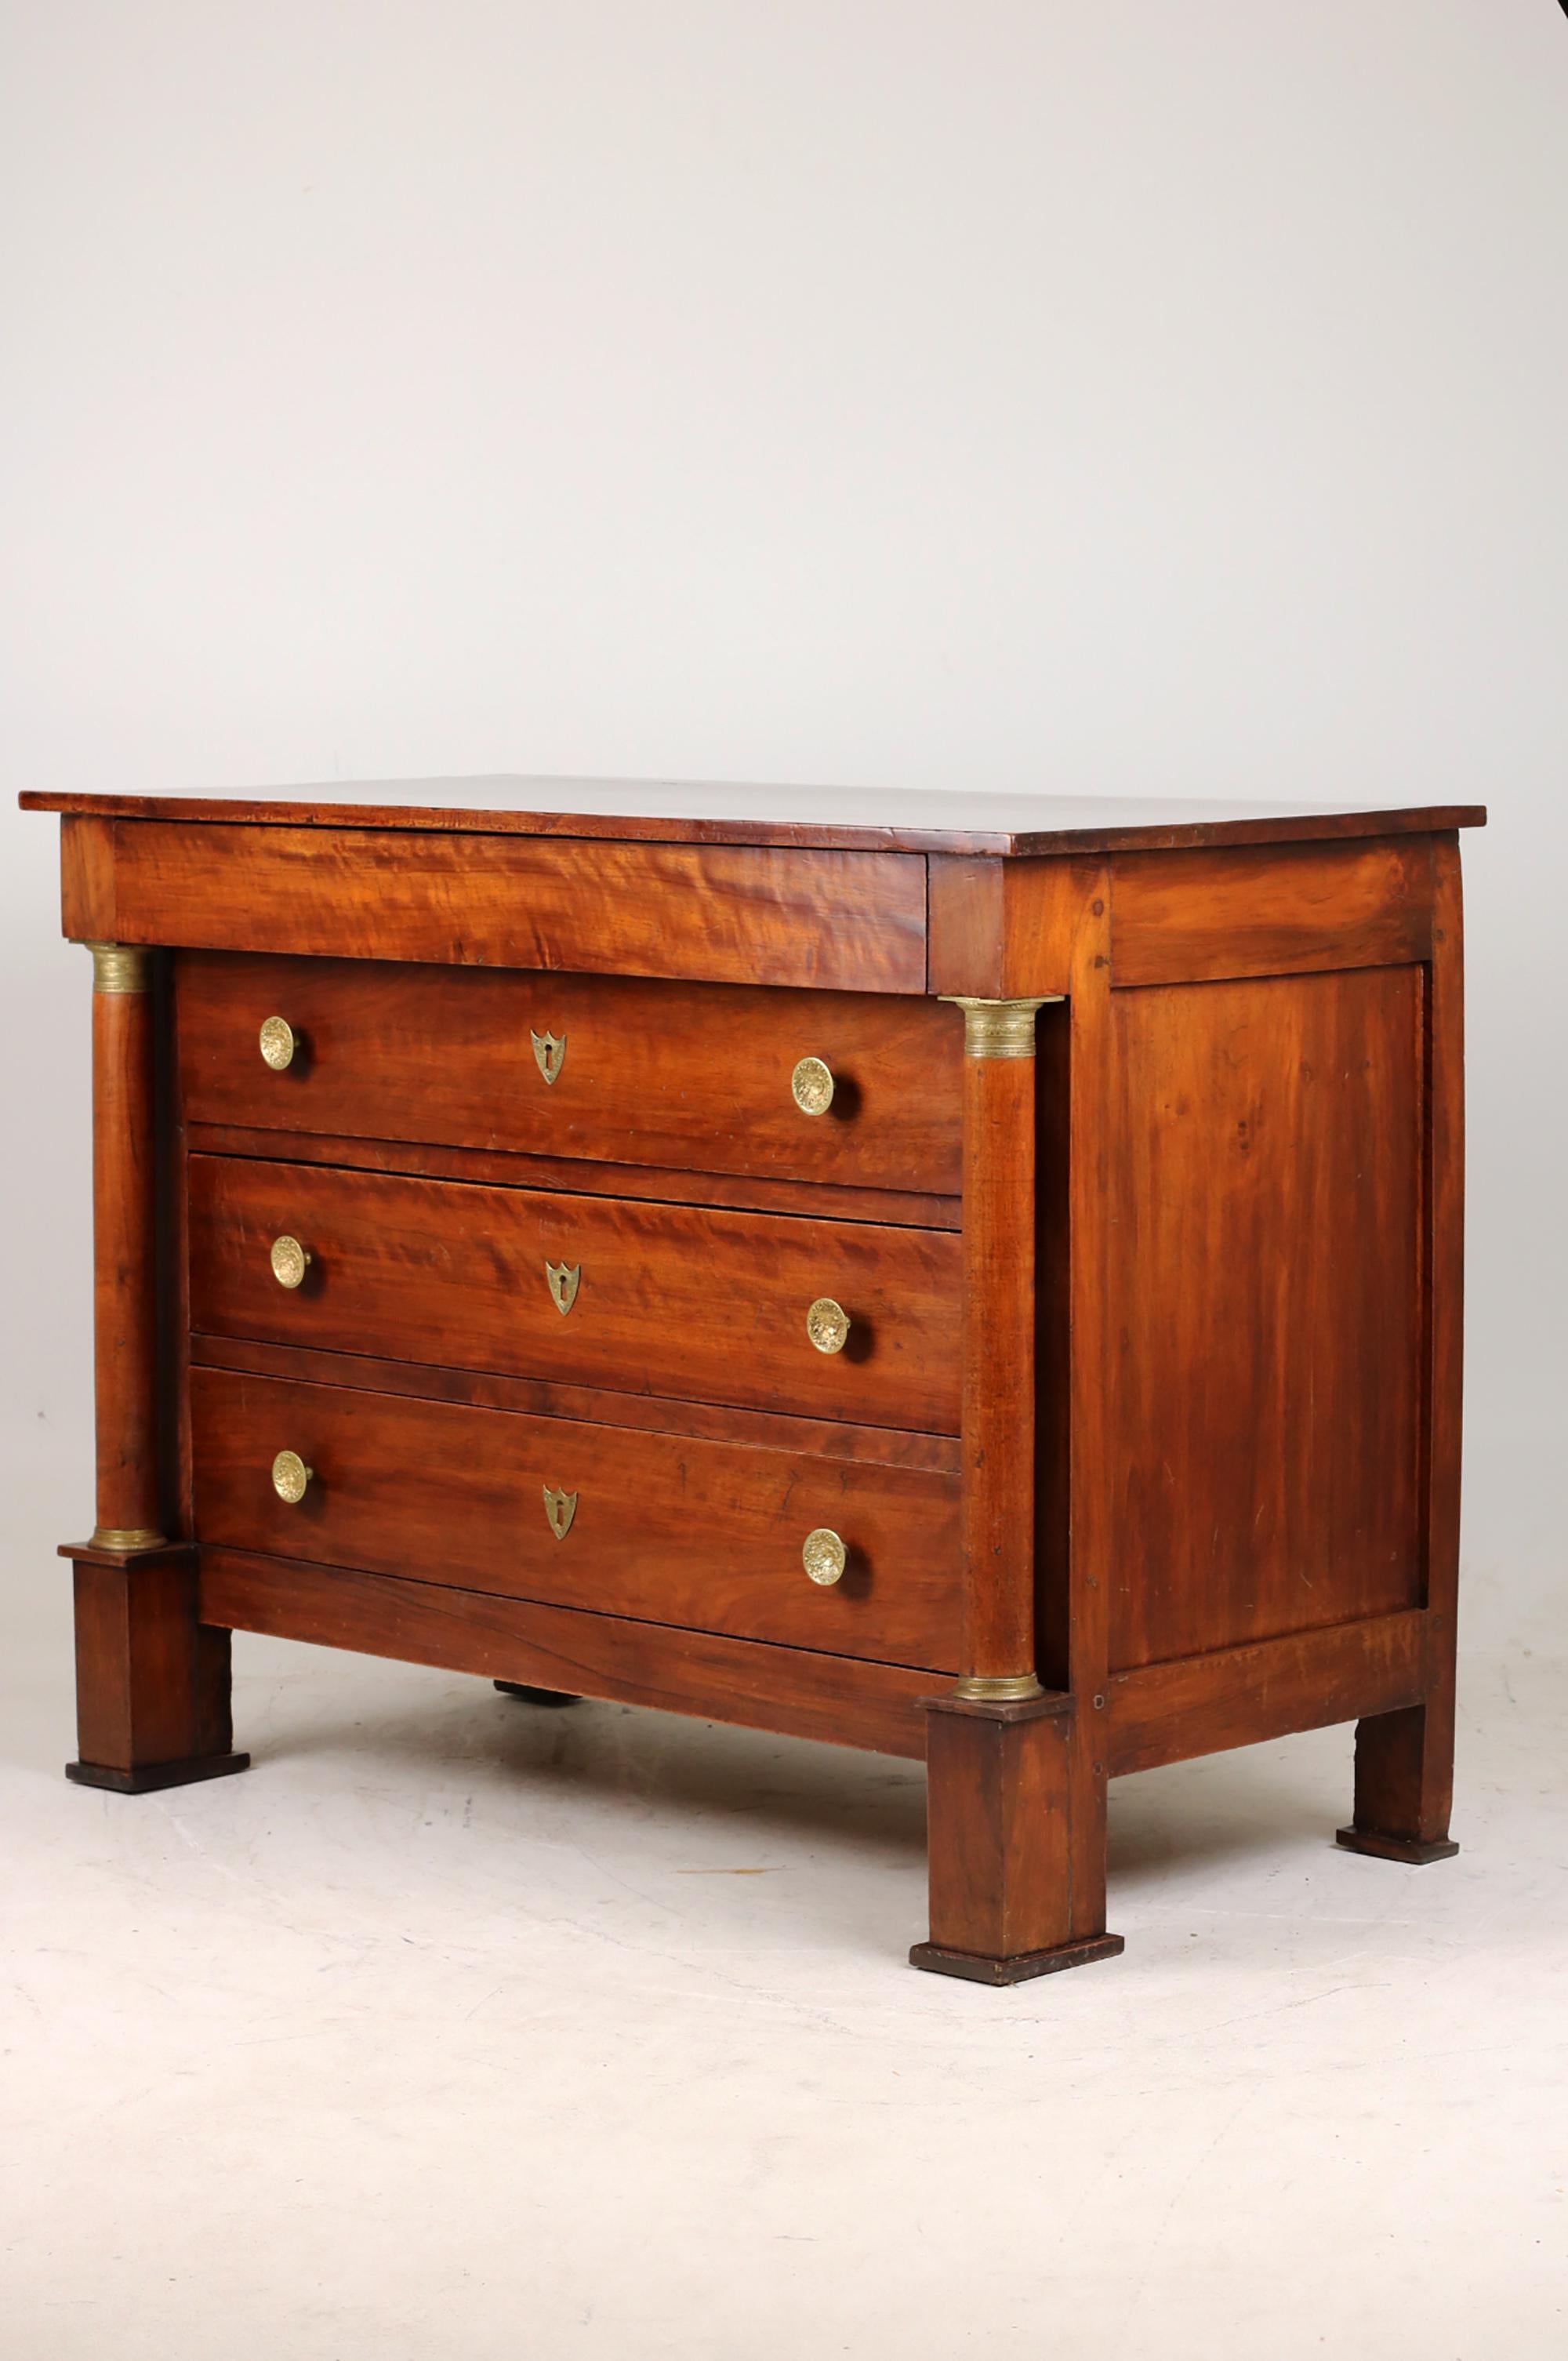 Polished Antique Empire XIX century chest of drawers with beautifull patina.